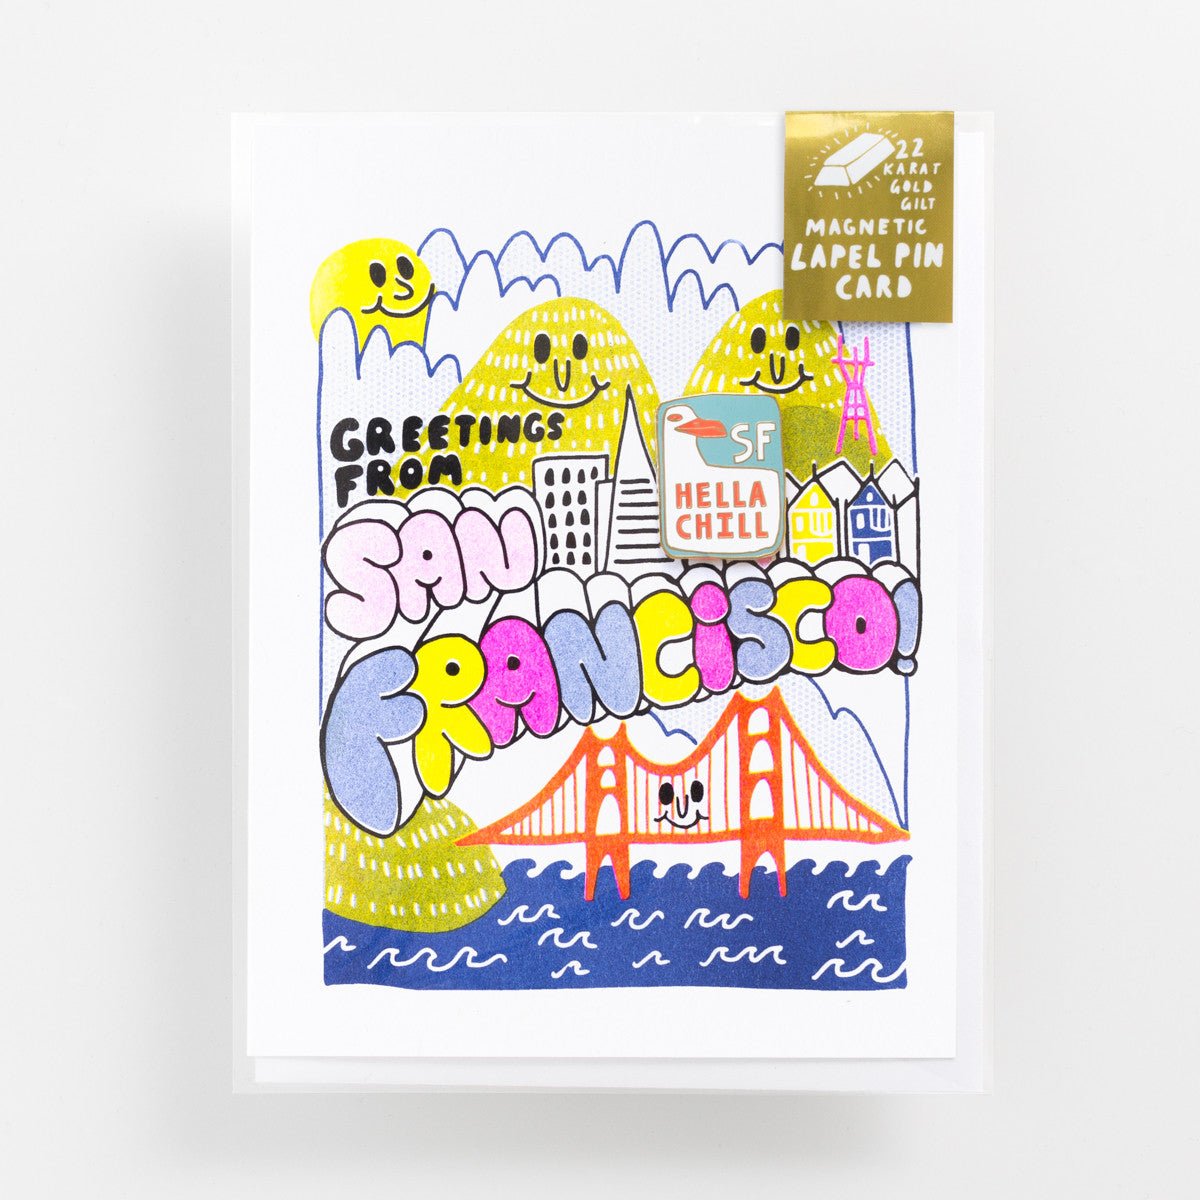 Greetings from SF - Lapel Pin Card - Yellow Owl Workshop